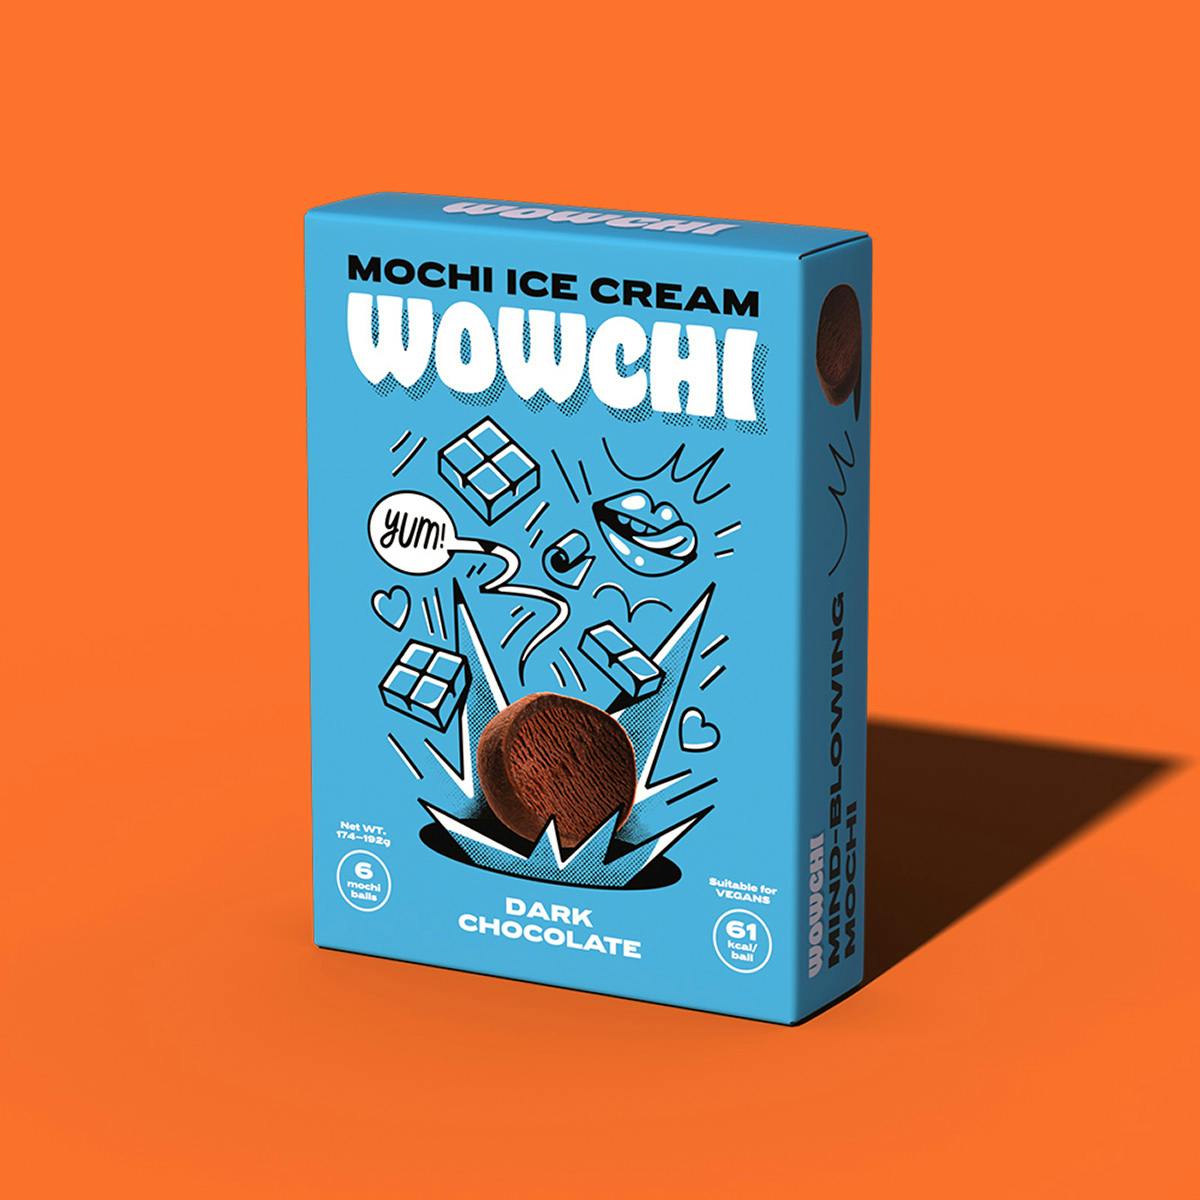 Image shows a blue box of Wowchi mochi with line illustrations and a picture of a mochi ball on the front, shown against an orange background